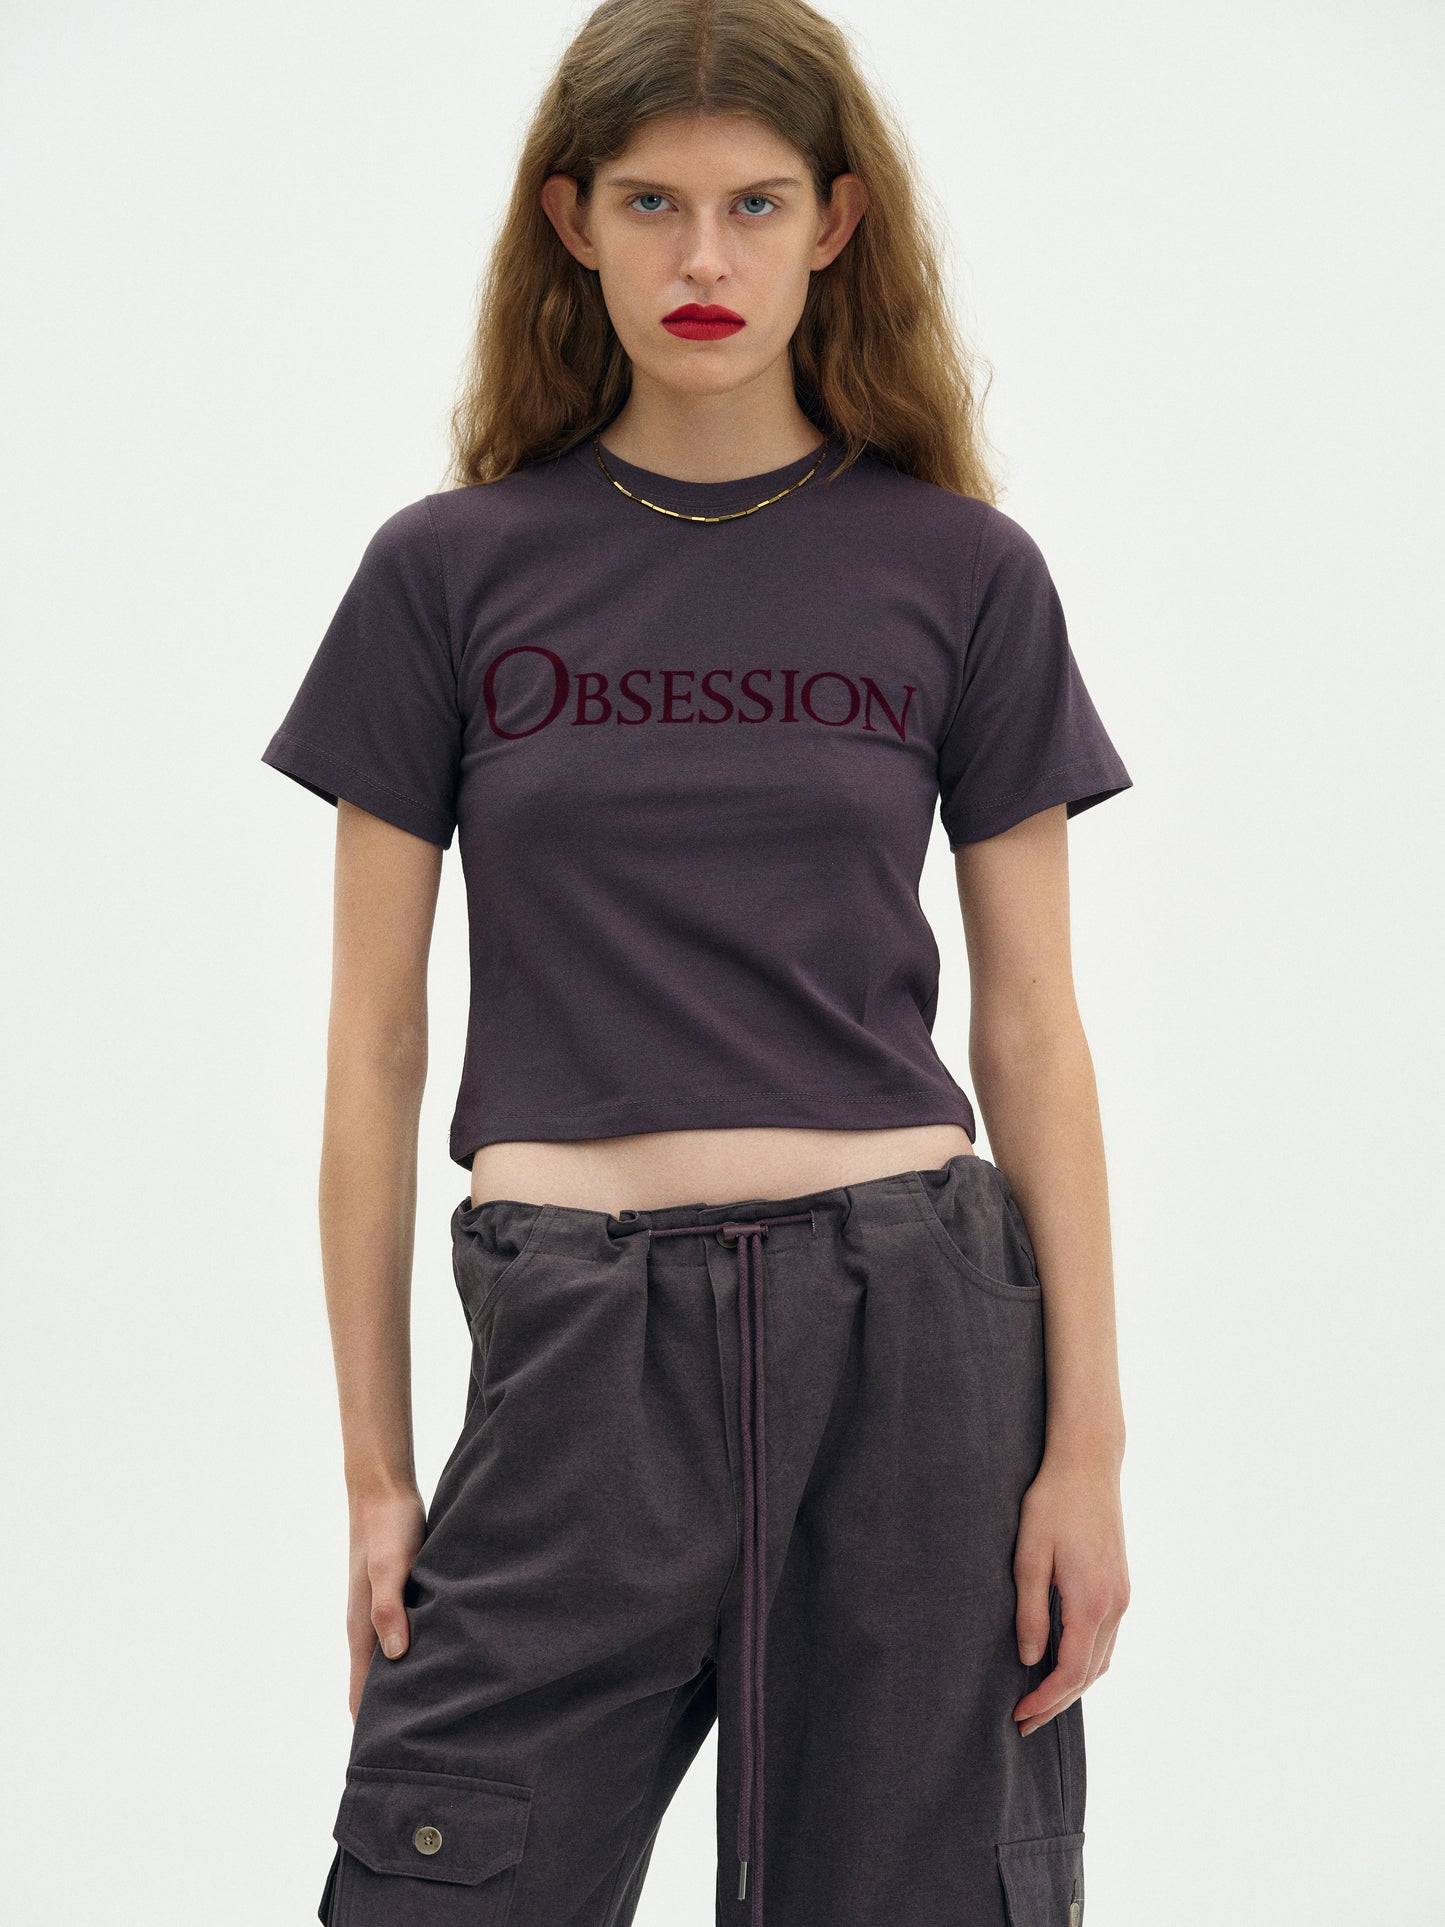 'Obsession' Baby T-Shirt, Plum